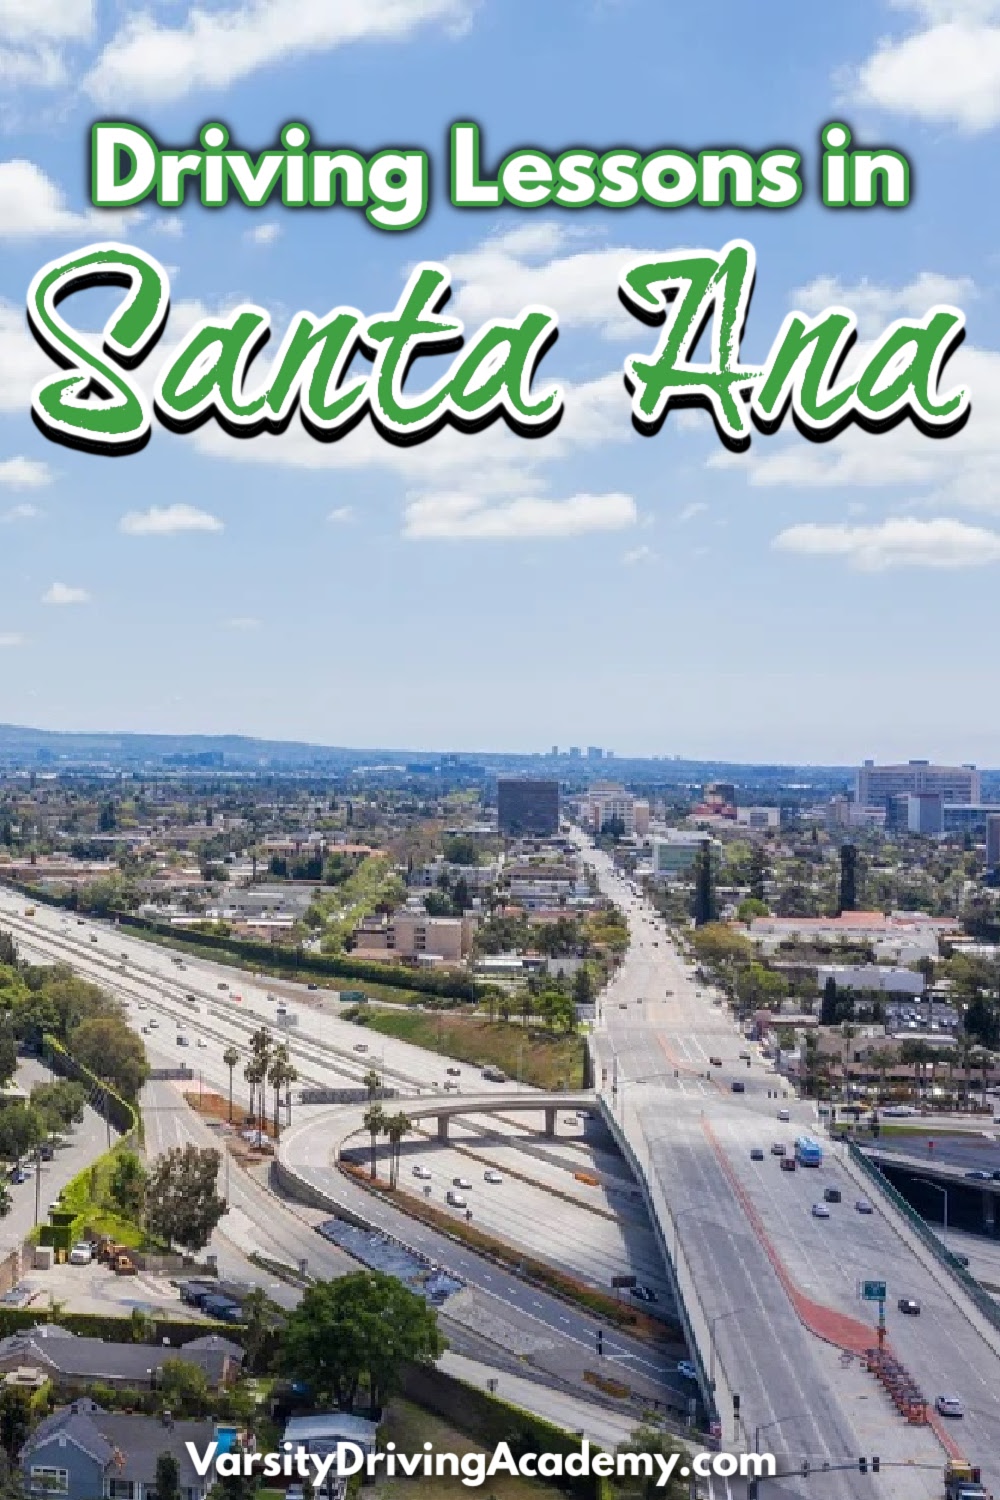 The best driving lessons in Santa Ana are available at the best driving school for teens and adults, Varsity Driving Academy.